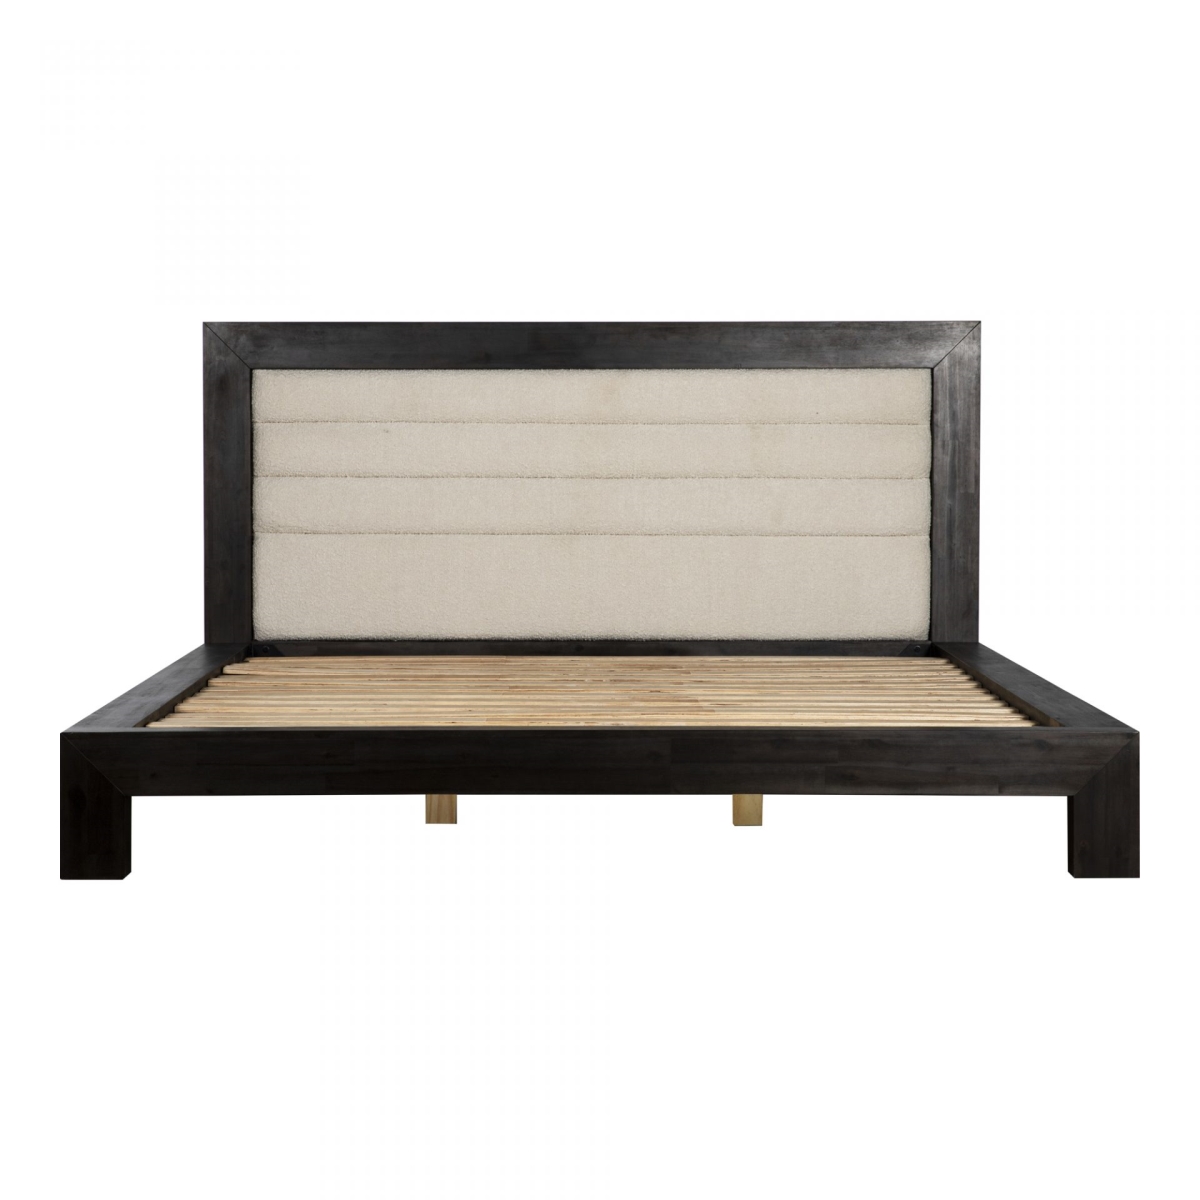 Zt-1031-25 Ashcroft Bed - King Size